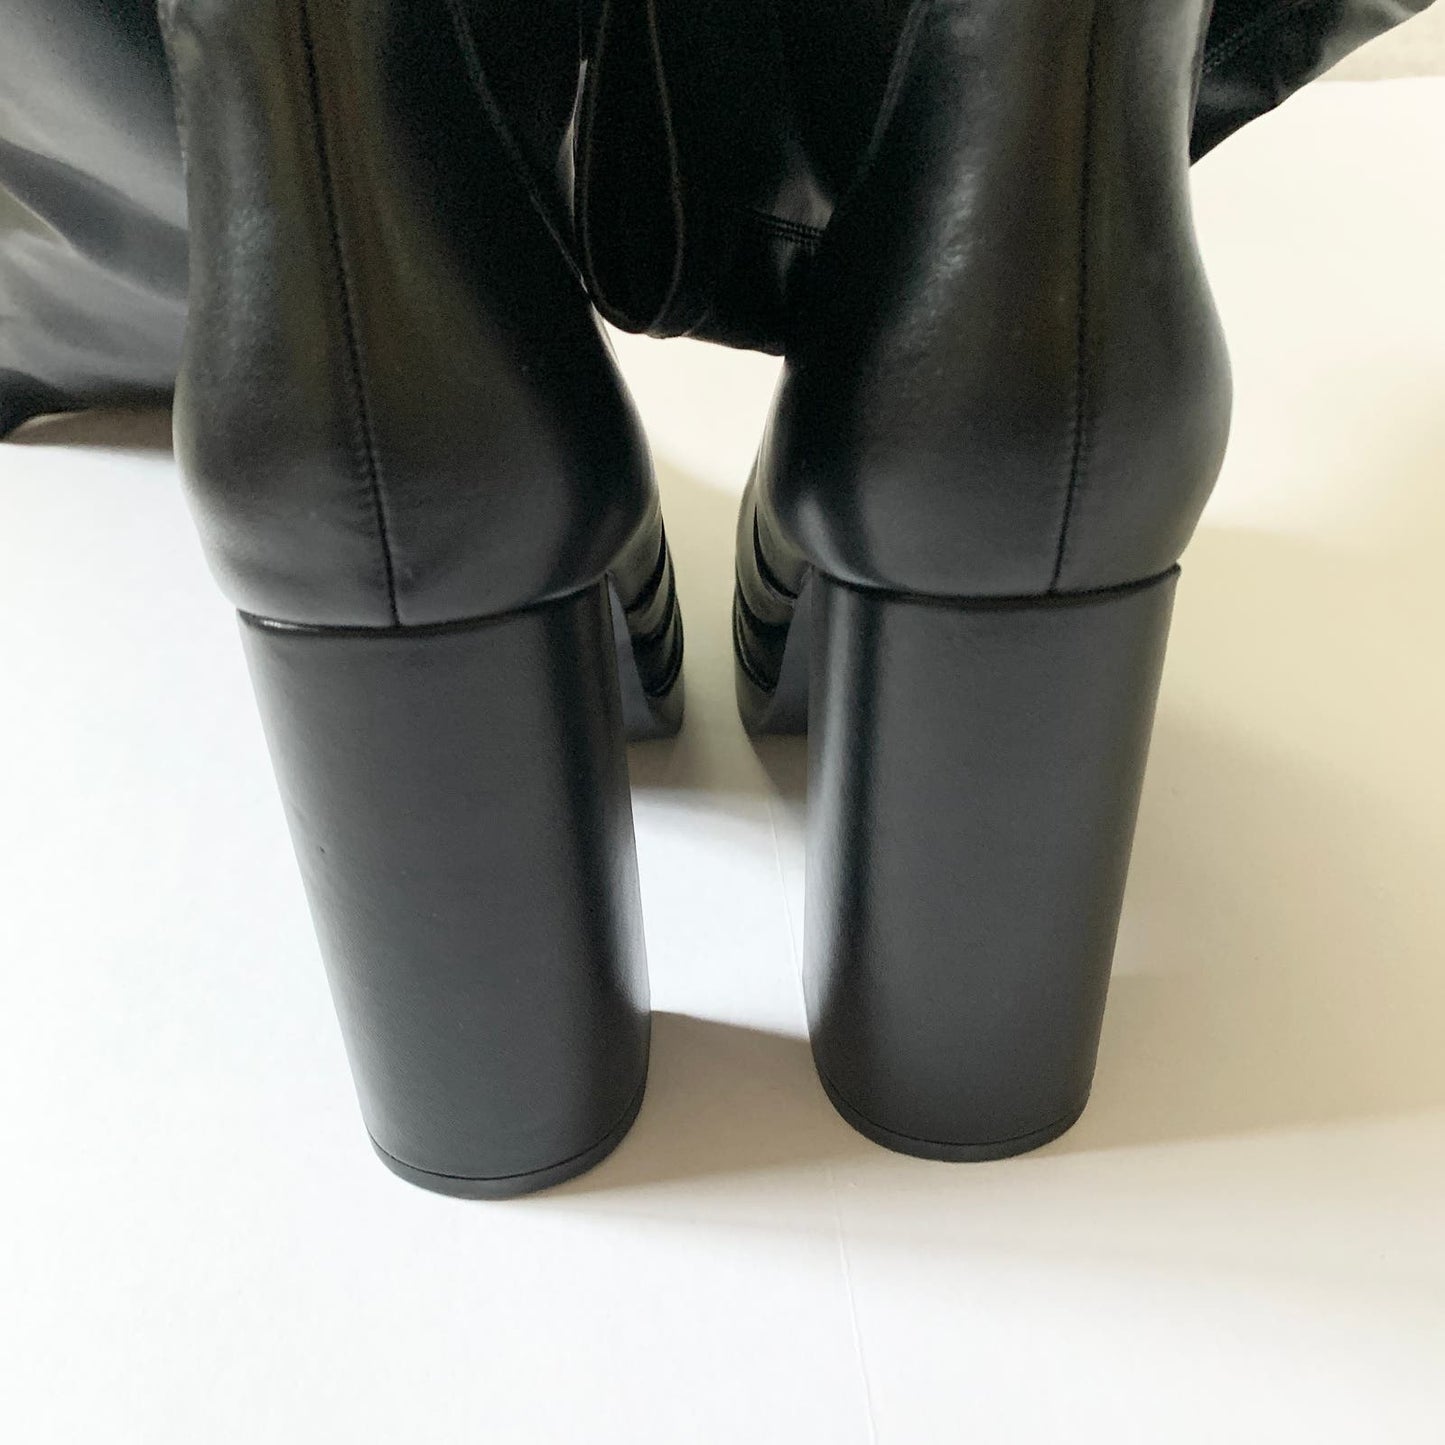 Dream Pairs Platform Over Knee High Chunky Square Toe GoGo Y2K Black Boots 8.5